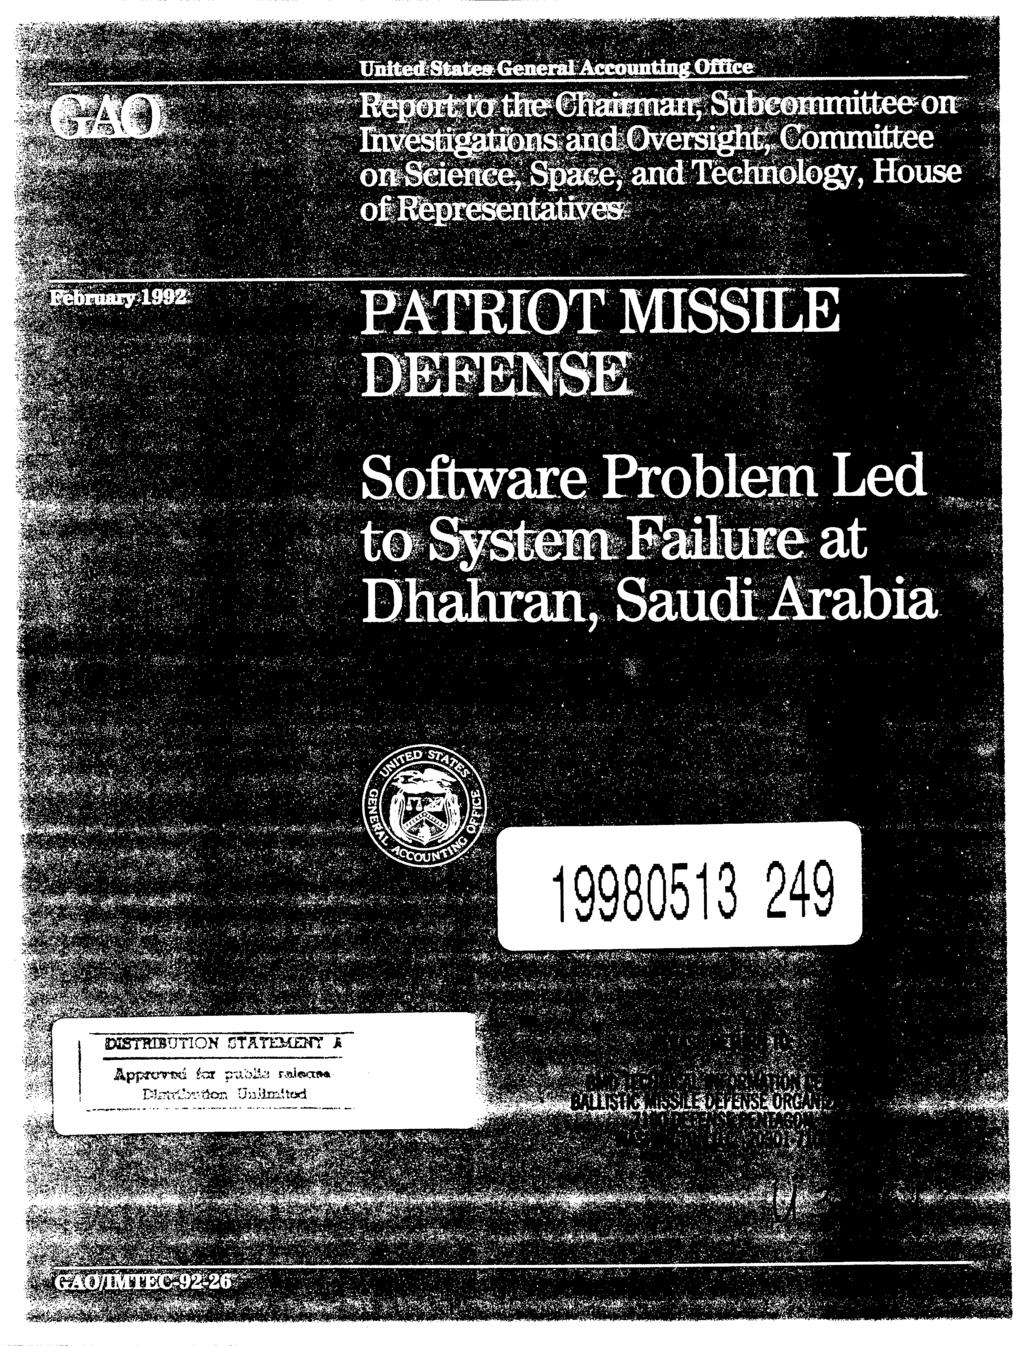 ?*$m mw 1, H«"» it in laii Office jri&^andiovers^ht;gbmmittee afeejs$ää%and Technology,House ofbepre^eiitativess^ MTRIOT MISSILE Software Problem Led Dhahran, Saudi Arabia ^^y^ 19980513 249 II Hi